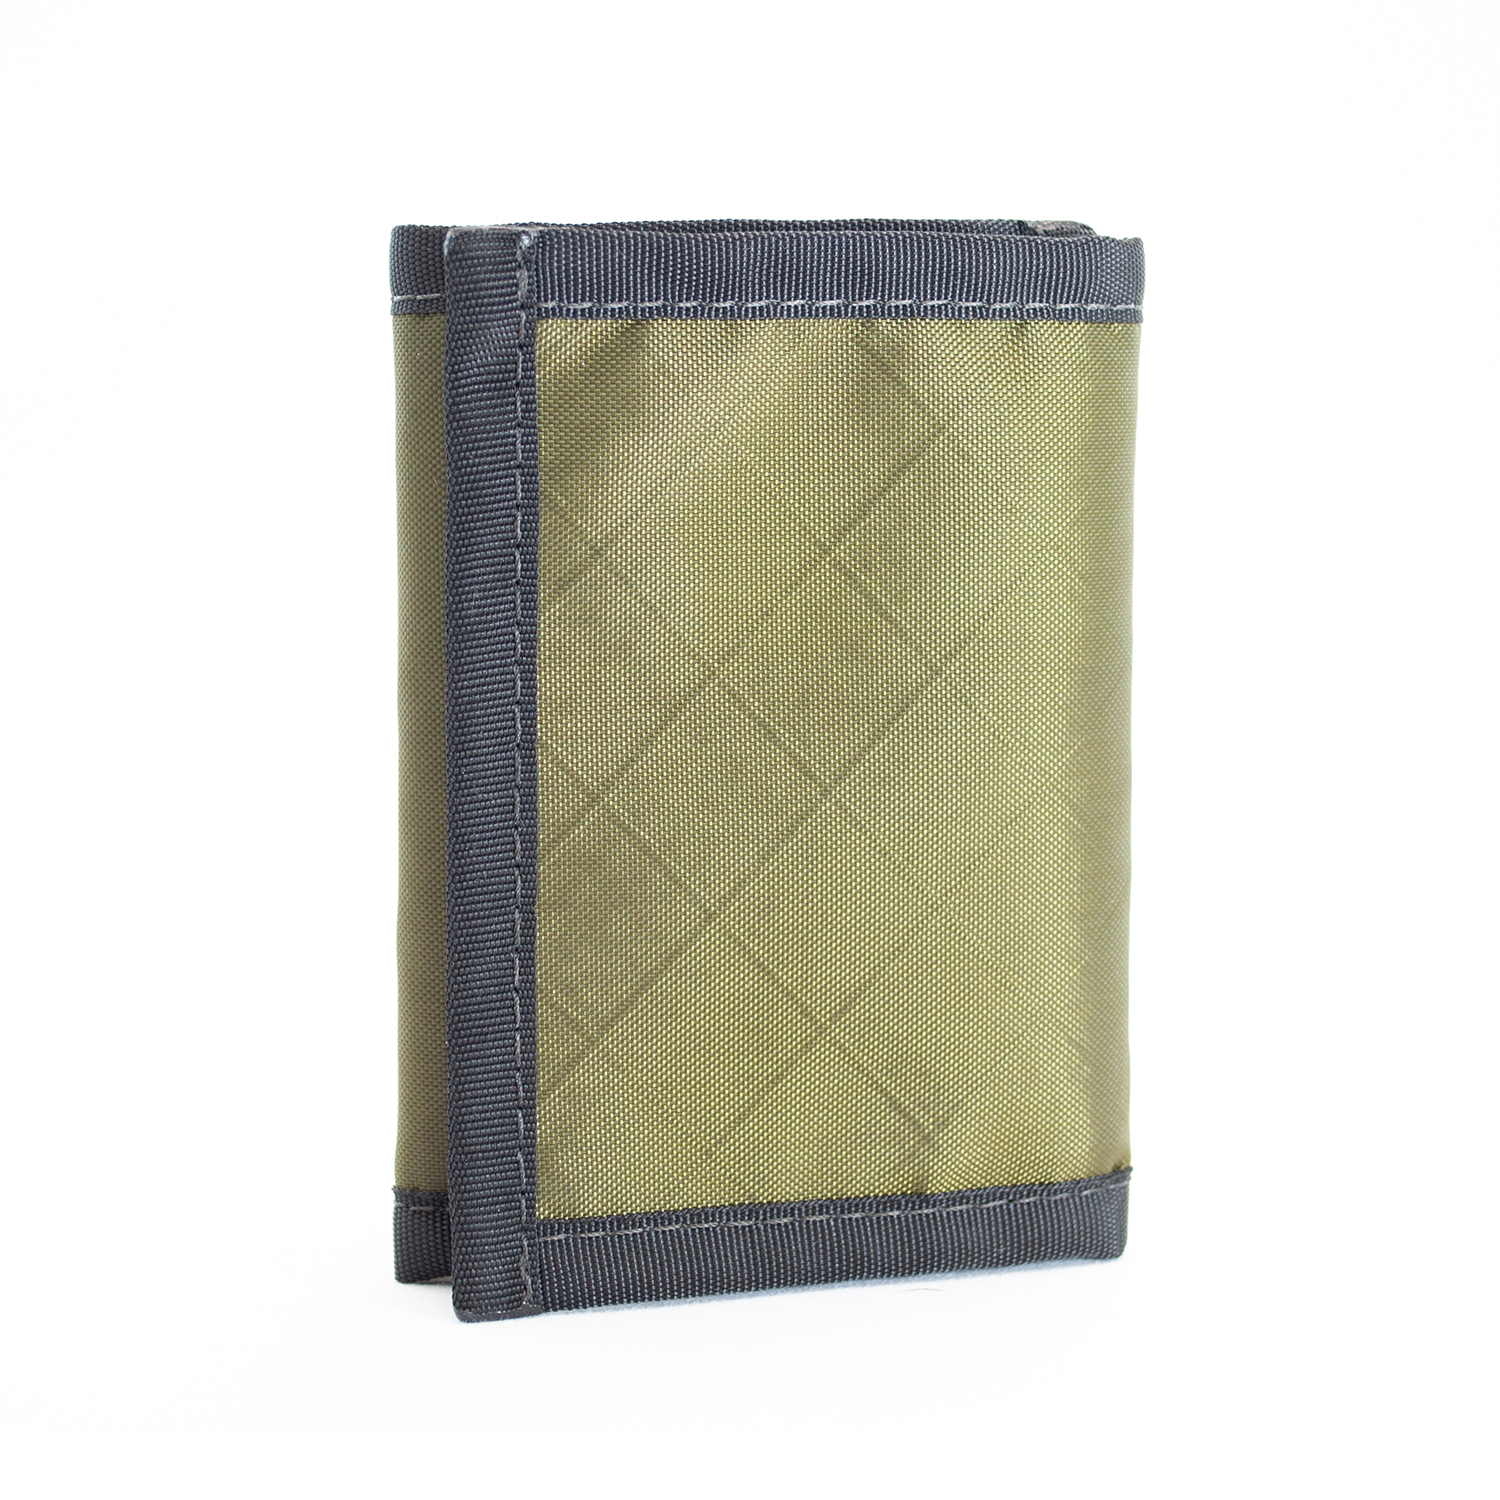 Flowfold Traveler Trifold Wallet Recycled Wallet of 100% Recycled Polyester EcoPak Olive Green